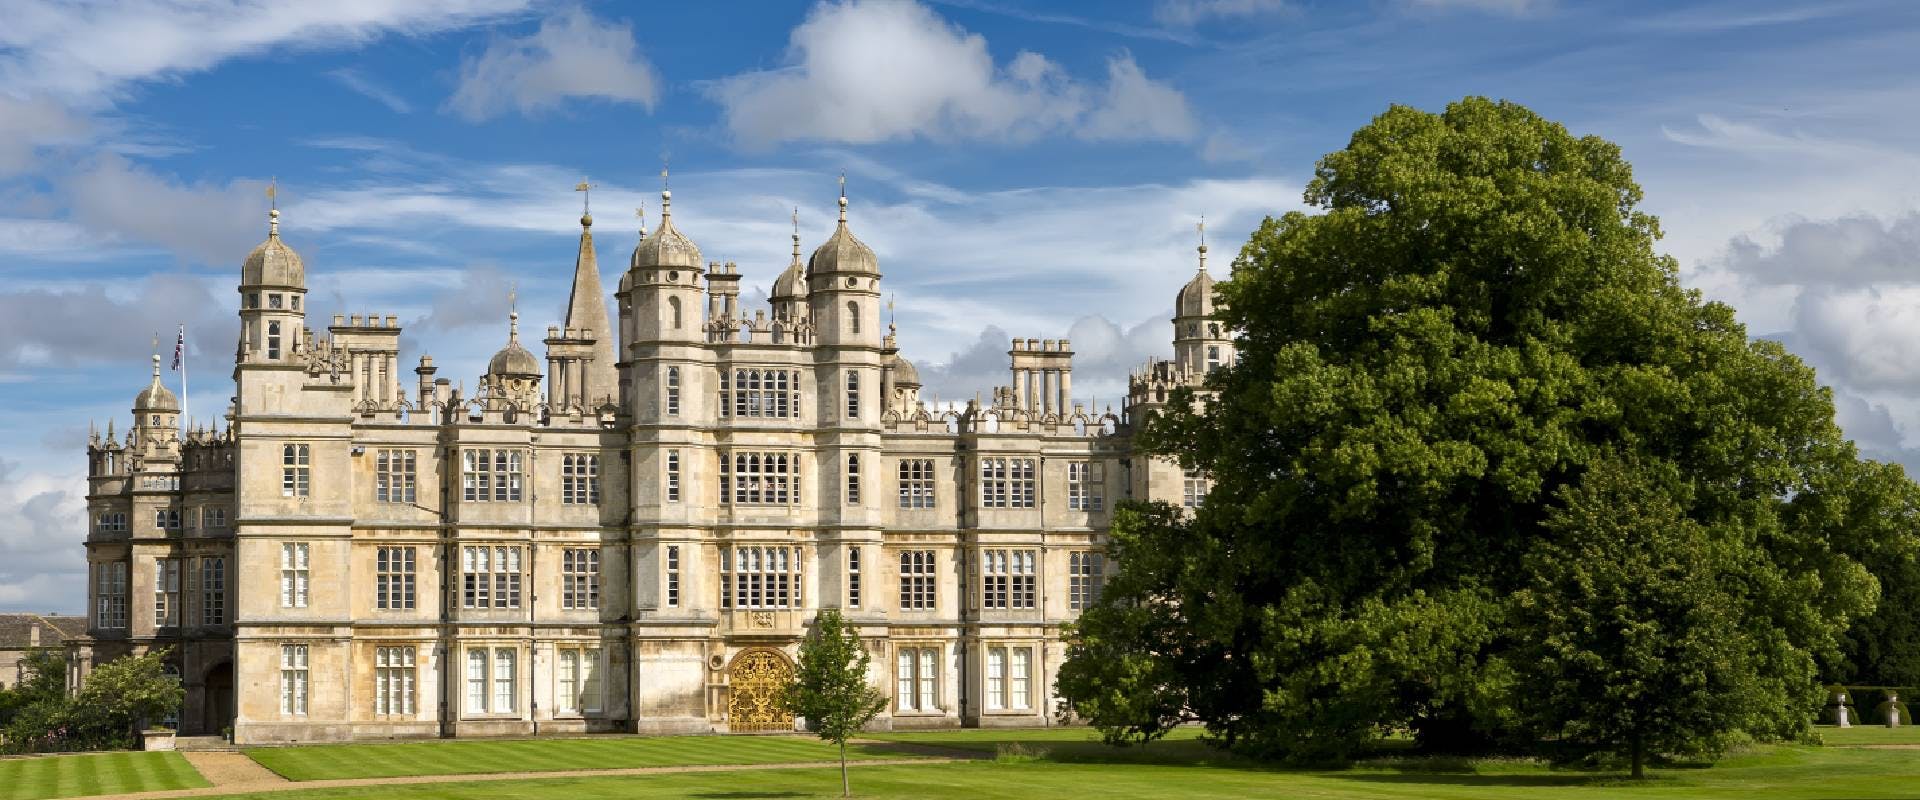 Burghley House in Stamford, England